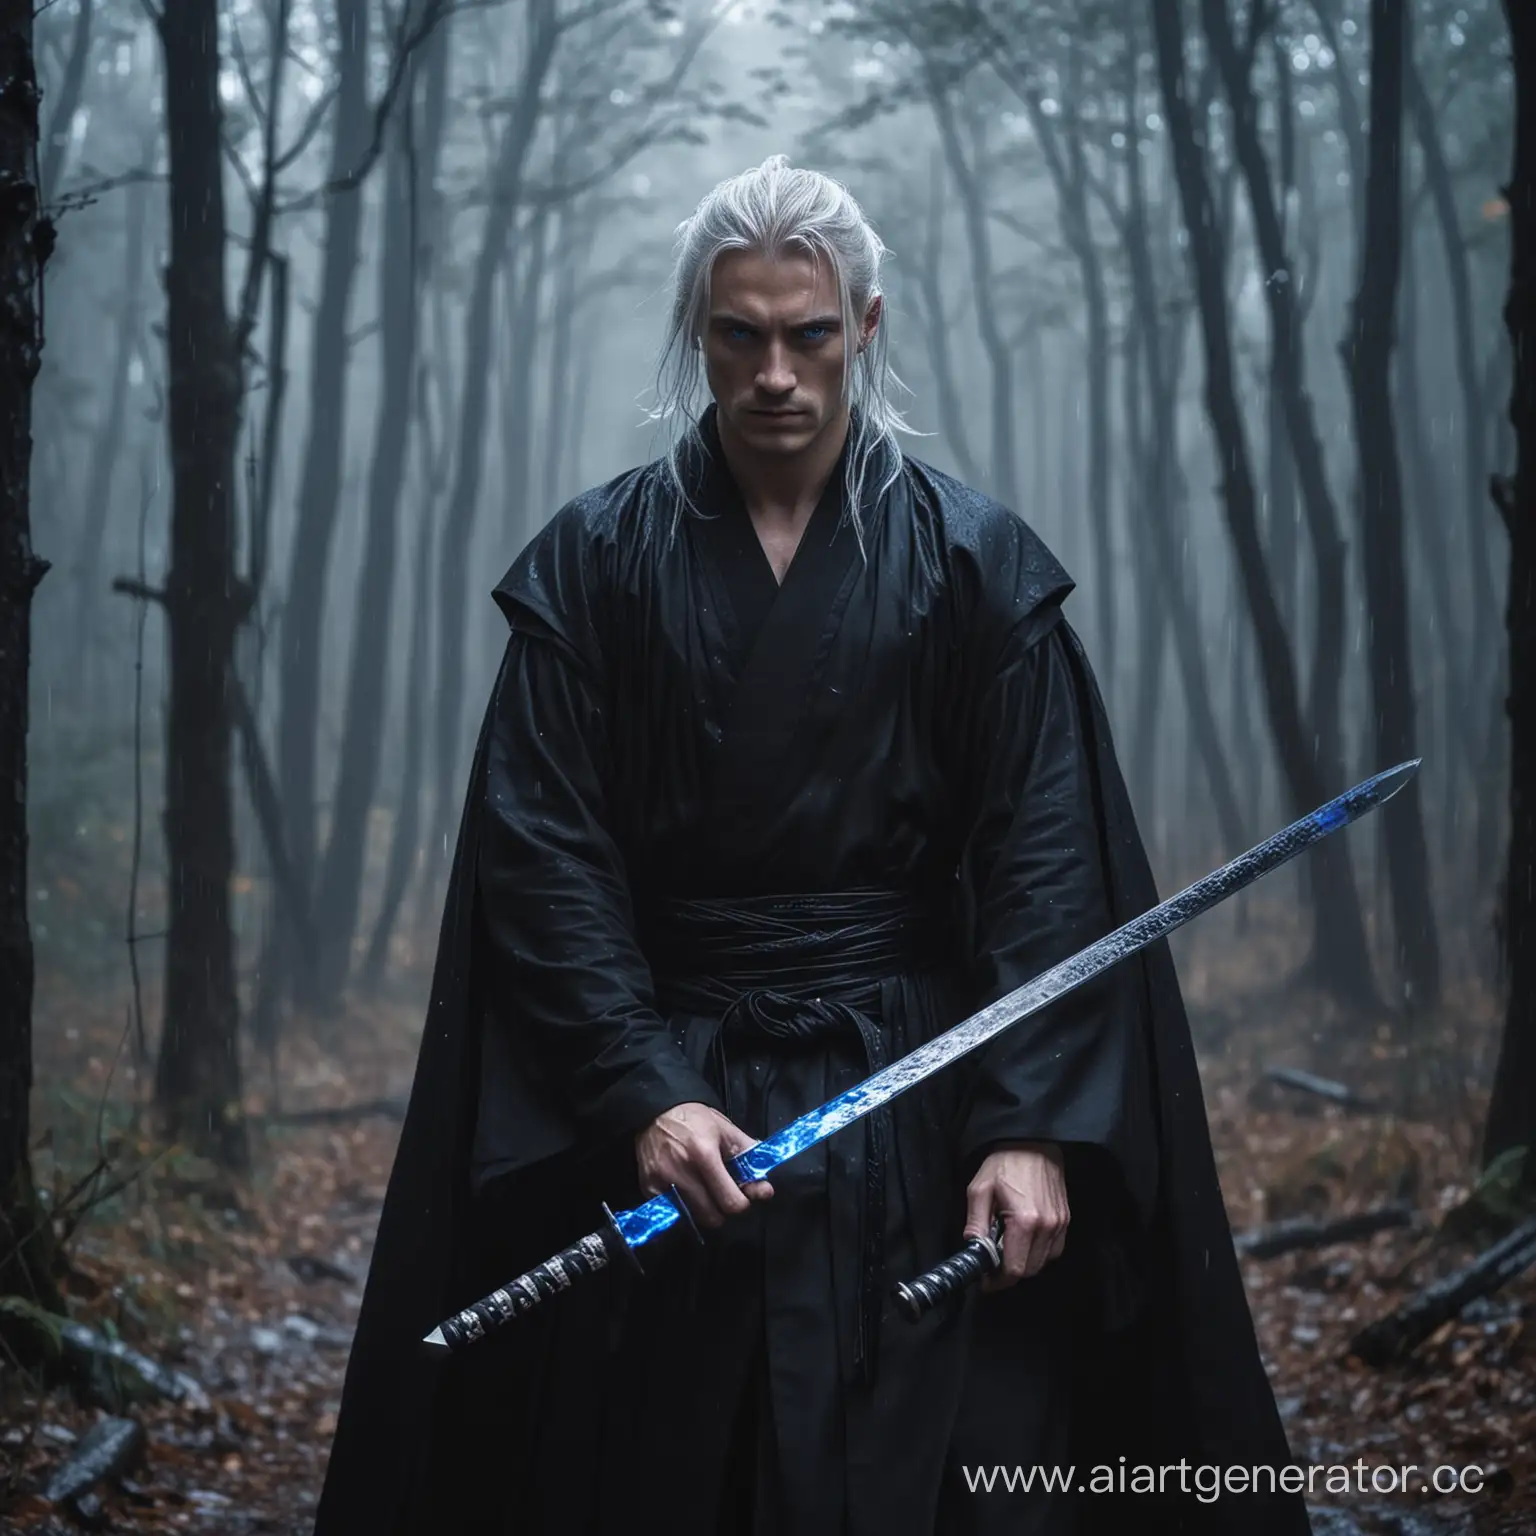 Mysterious-Samurai-Warrior-in-Stormy-Forest-with-Glowing-Blue-Eyes